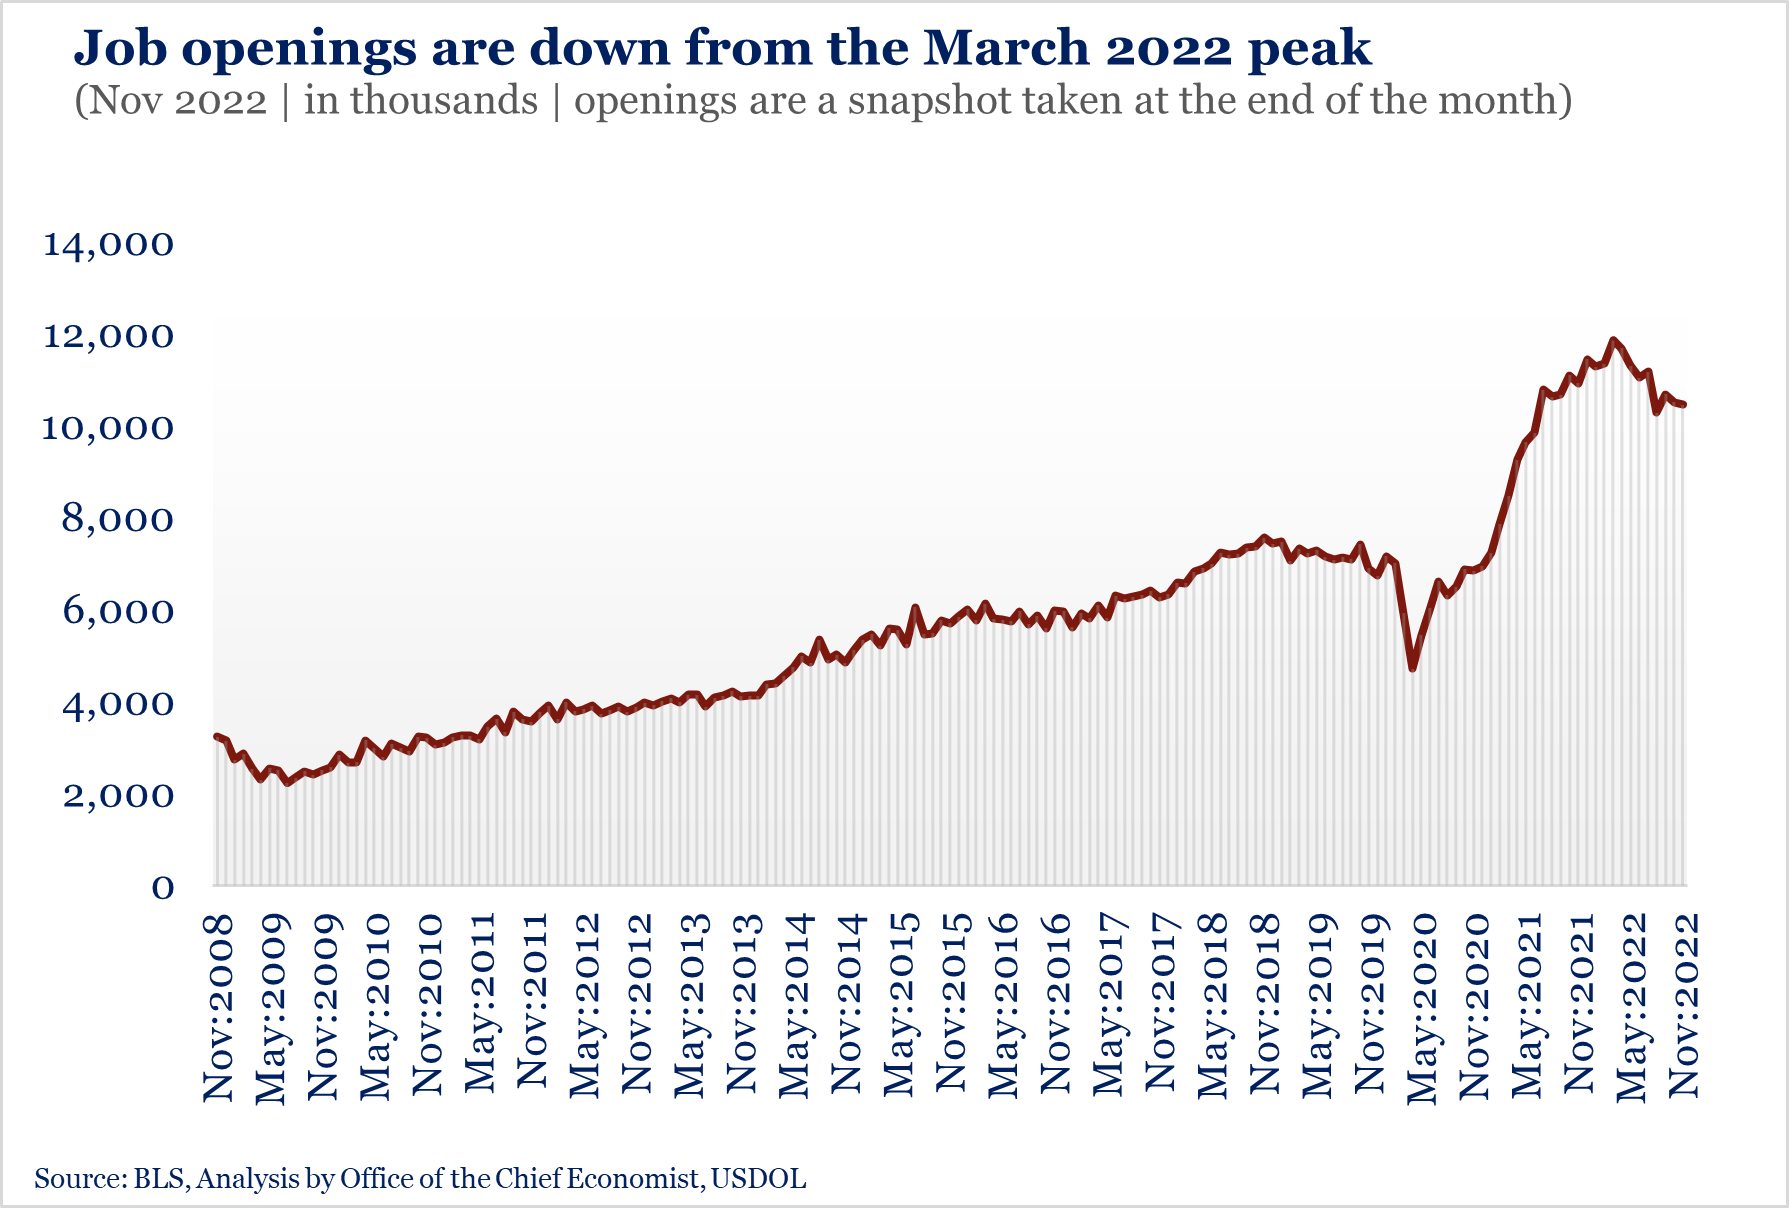 Job Openings Down from the March 2022 Peak